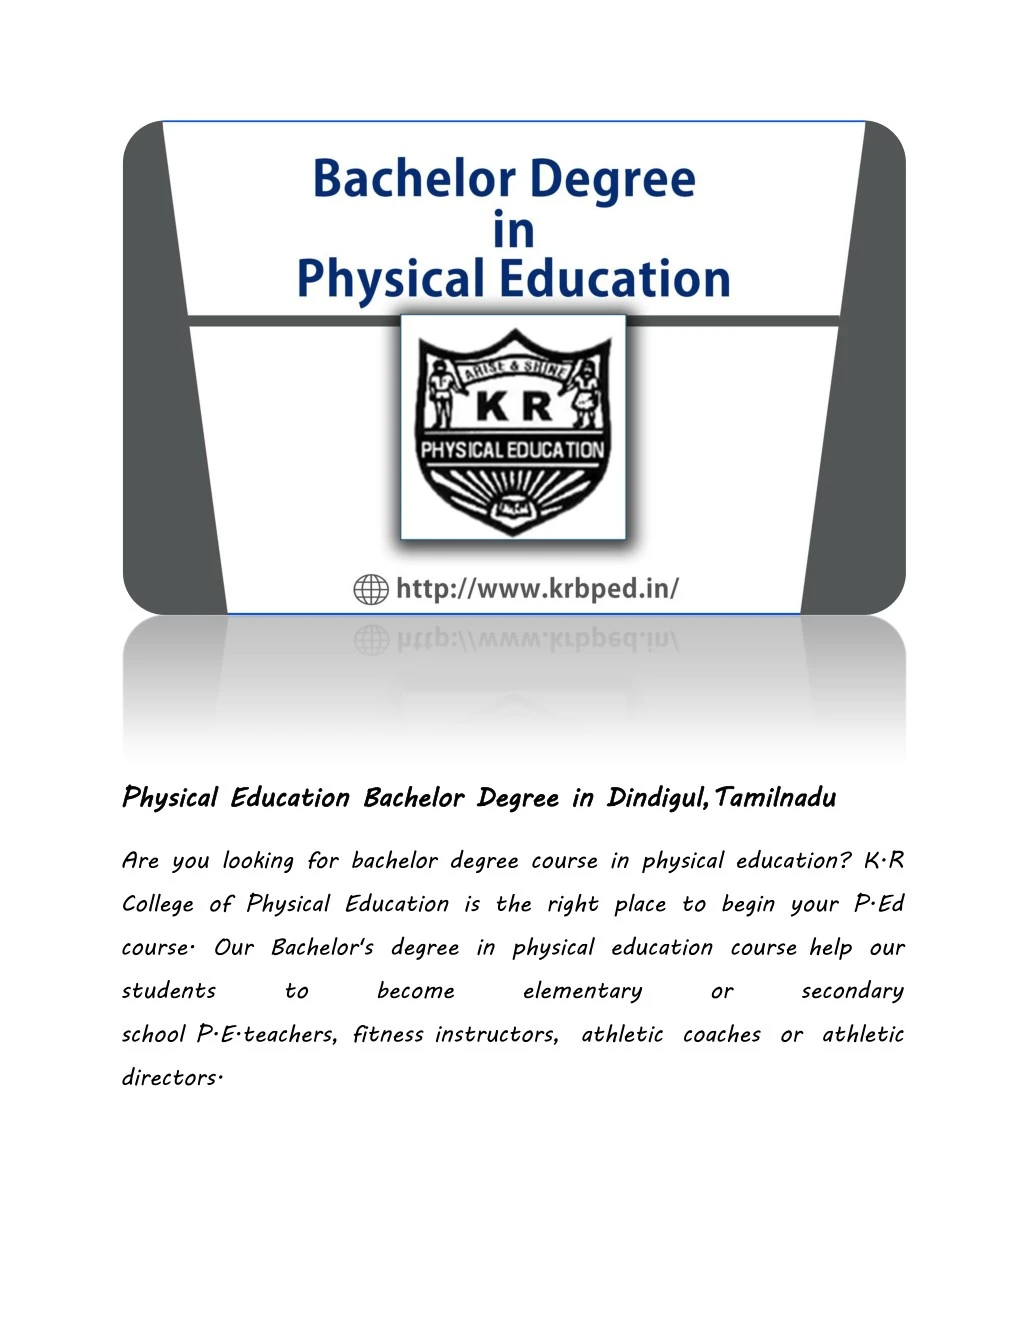 physical education bachelor degree in dindigul